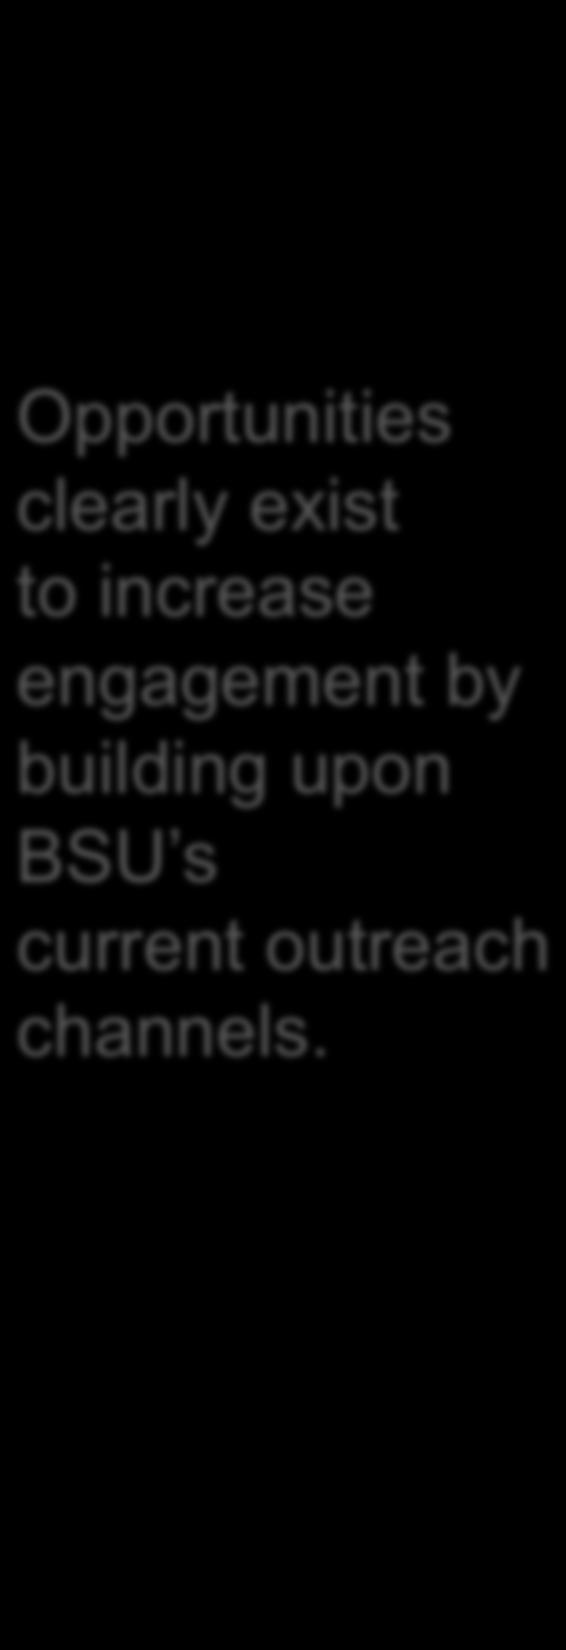 engagement by building